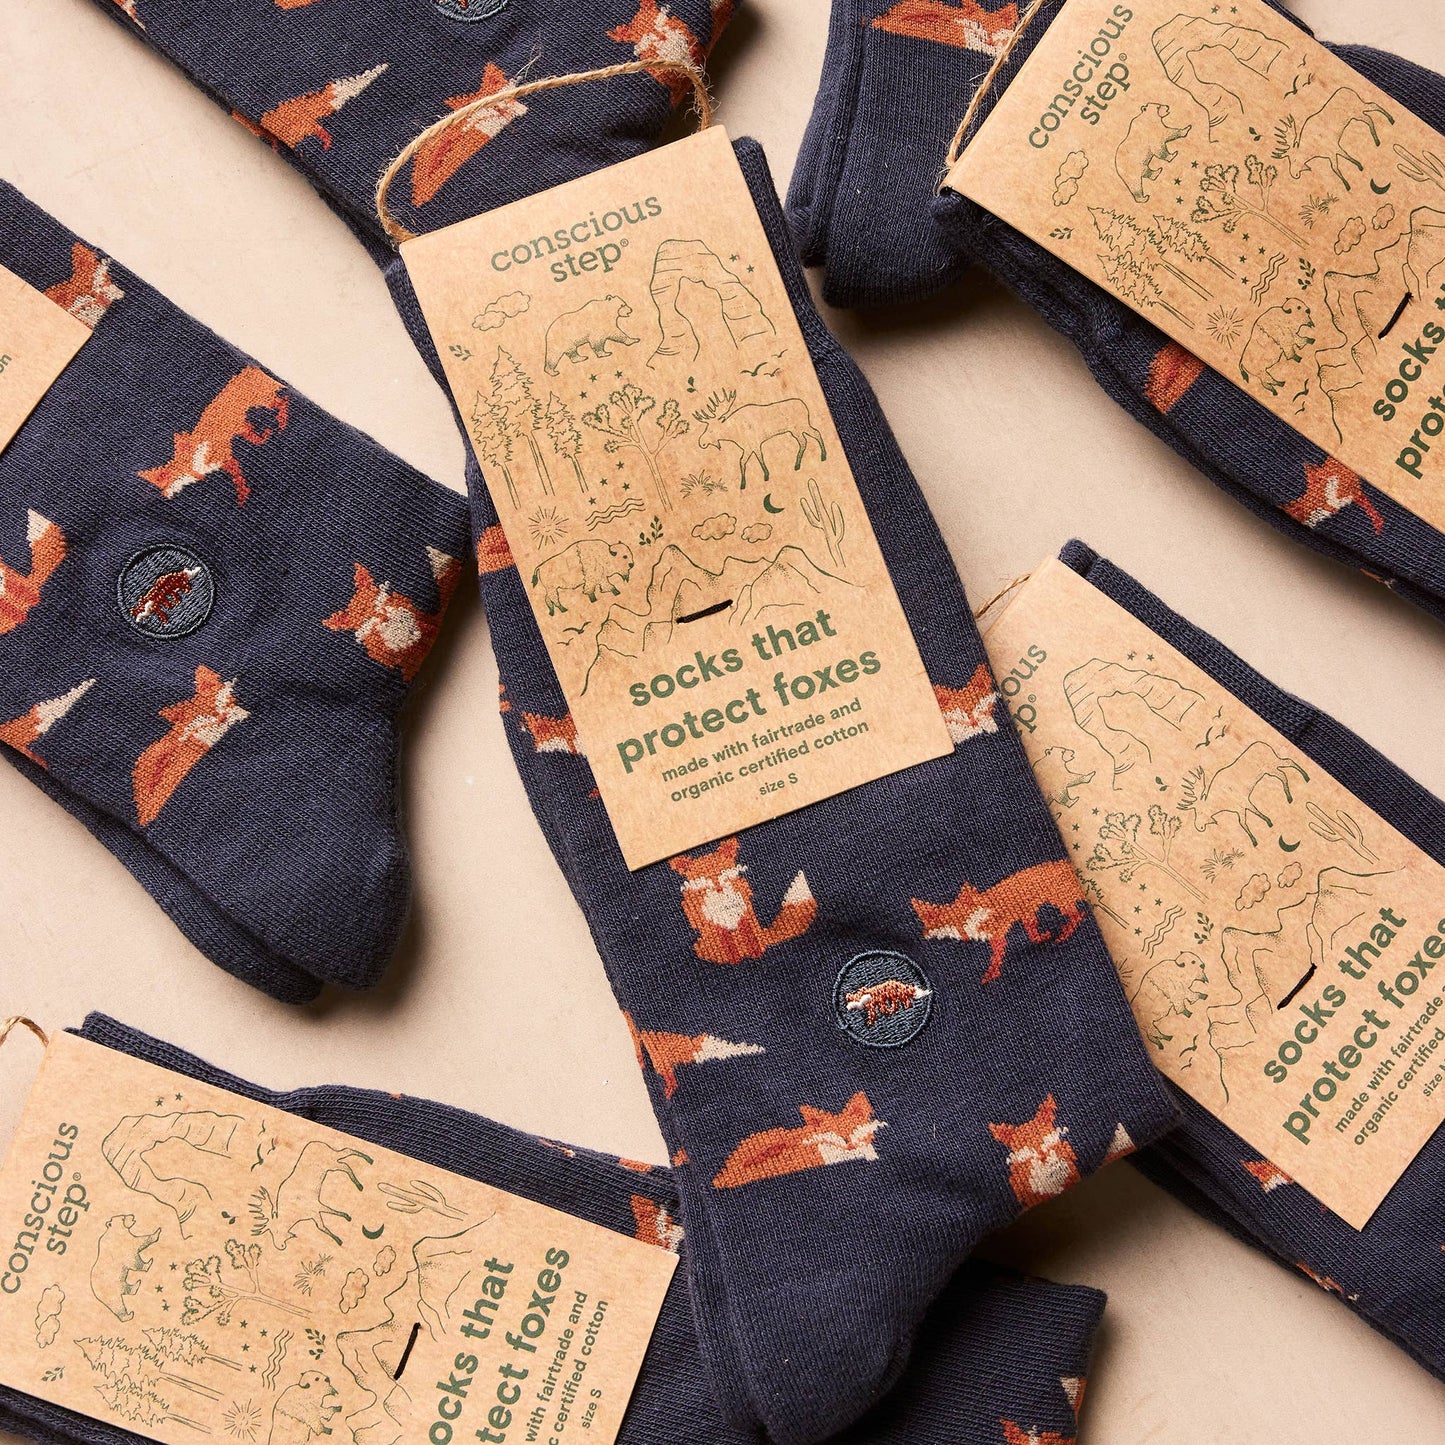 Socks that Protect Foxes: Small